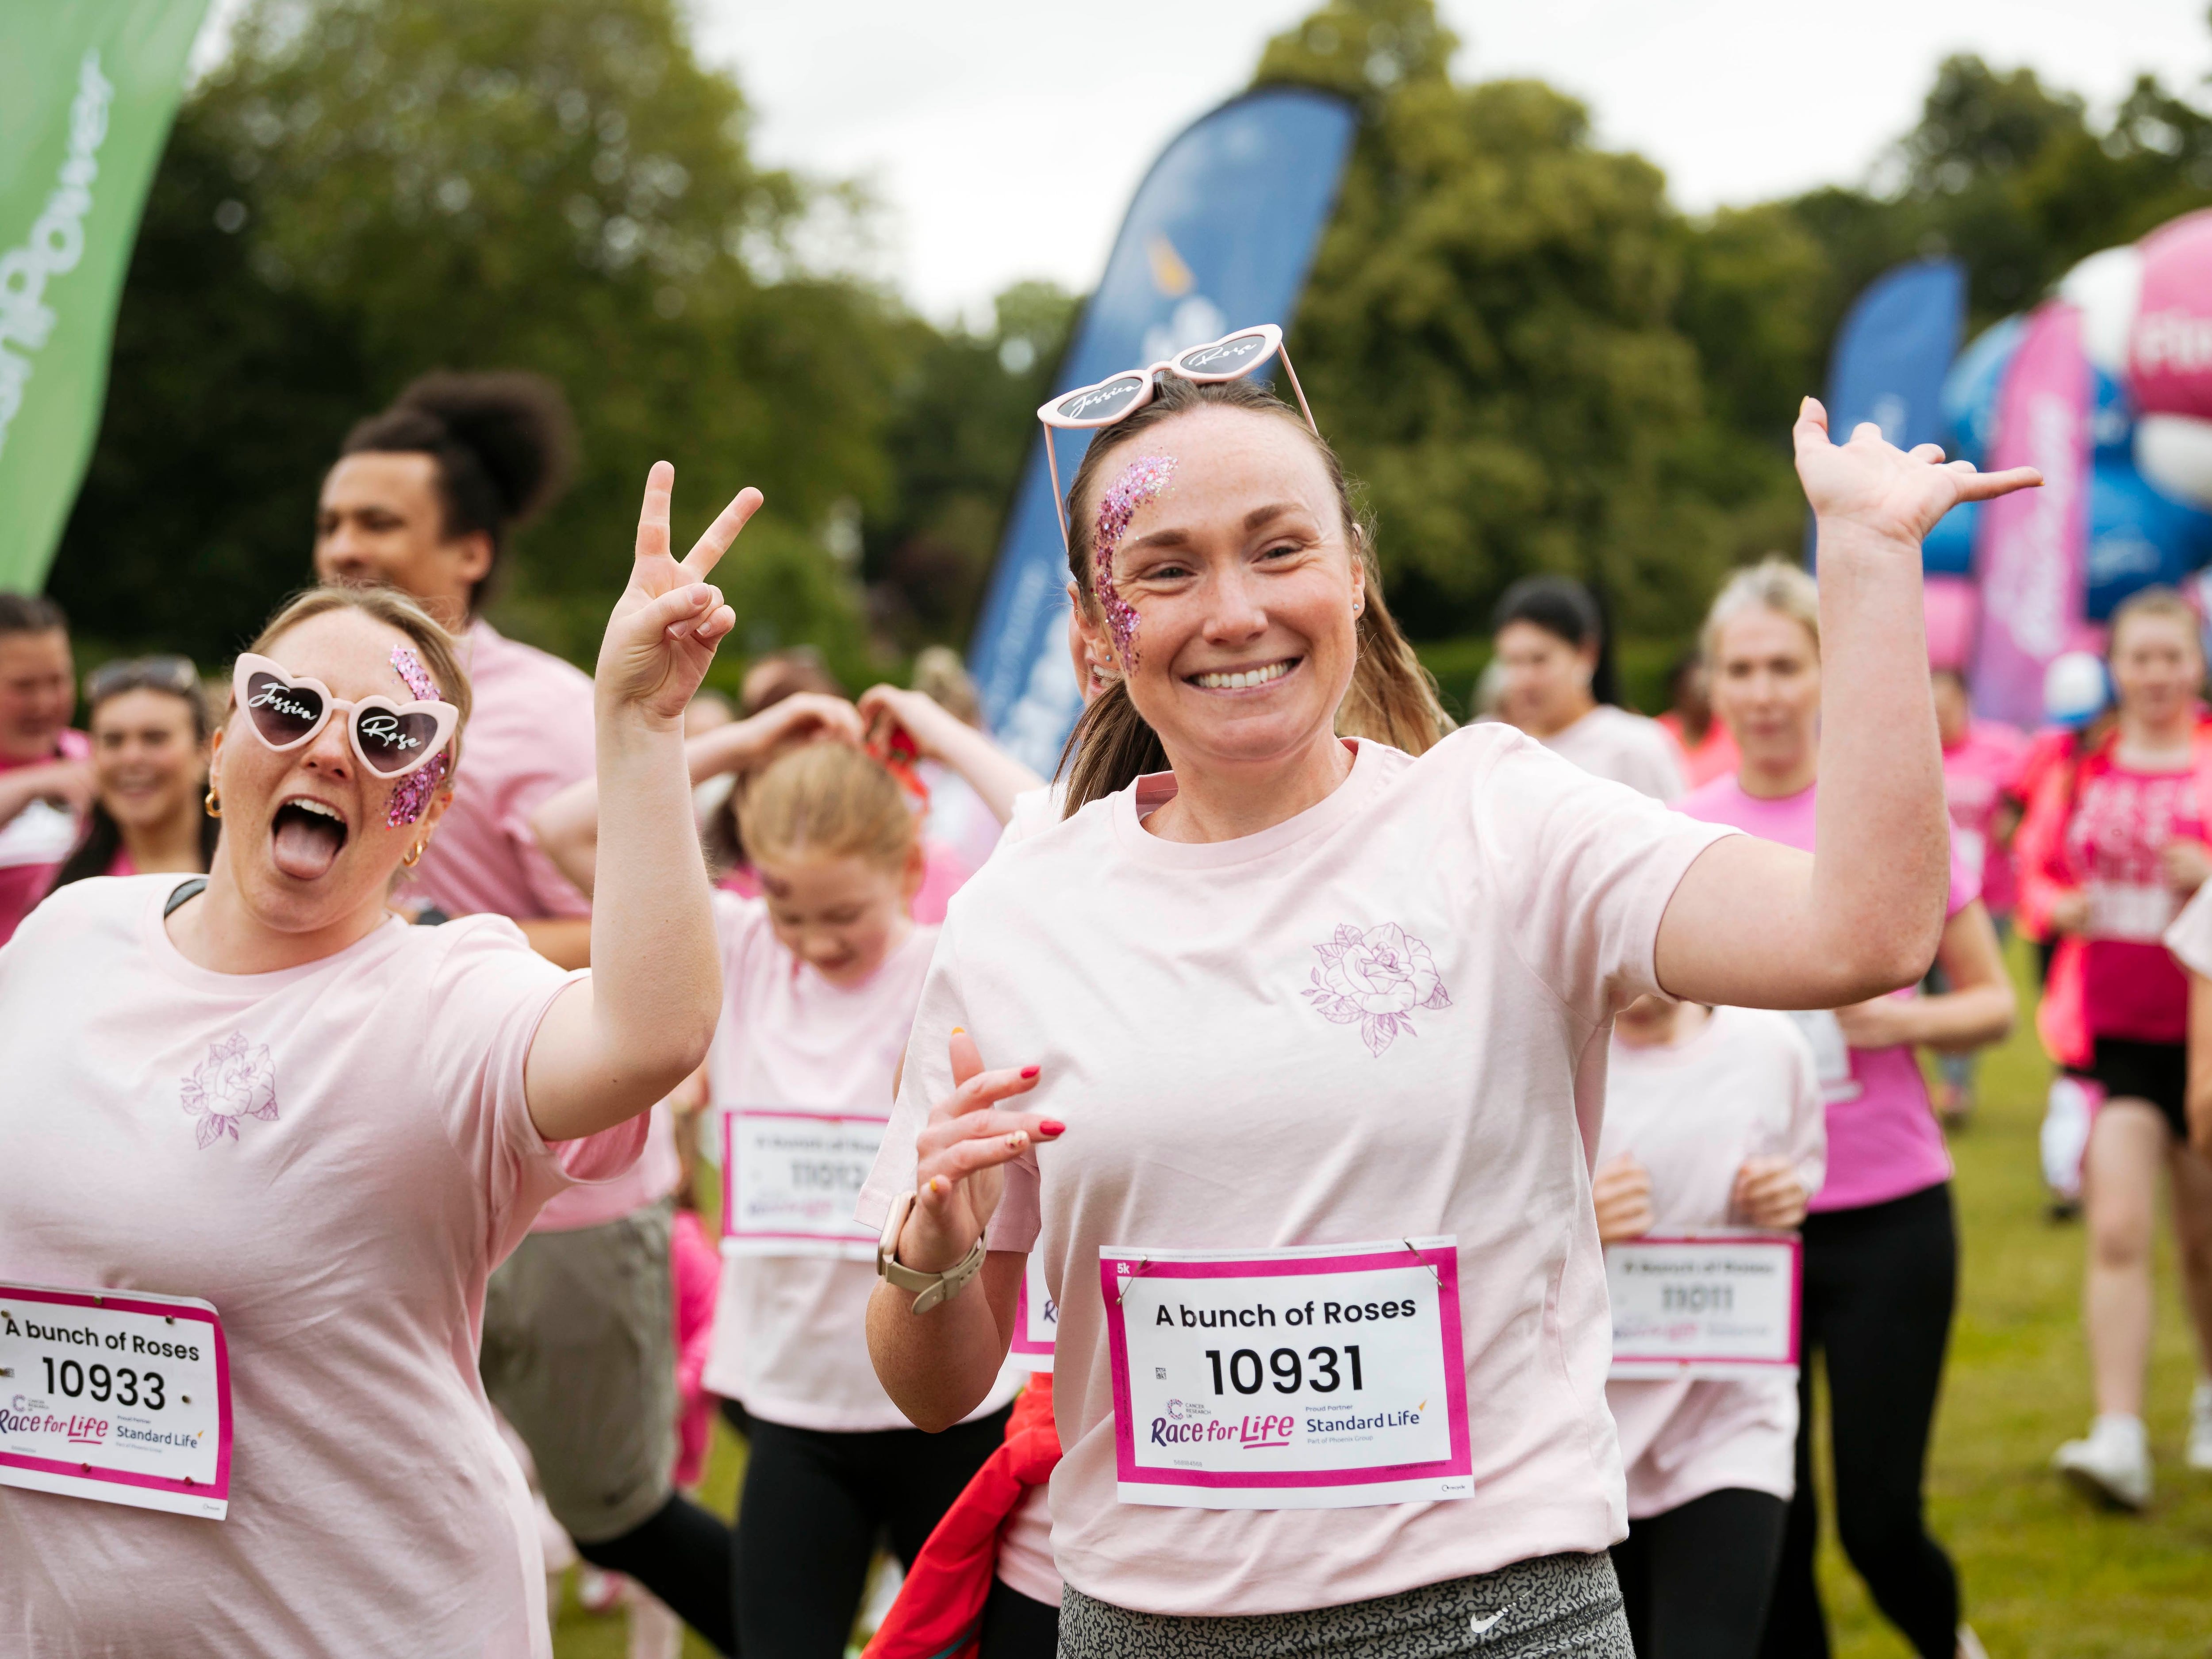 Watch: We join the Race for Life in Dudley as hundreds raise money for Cancer Research UK